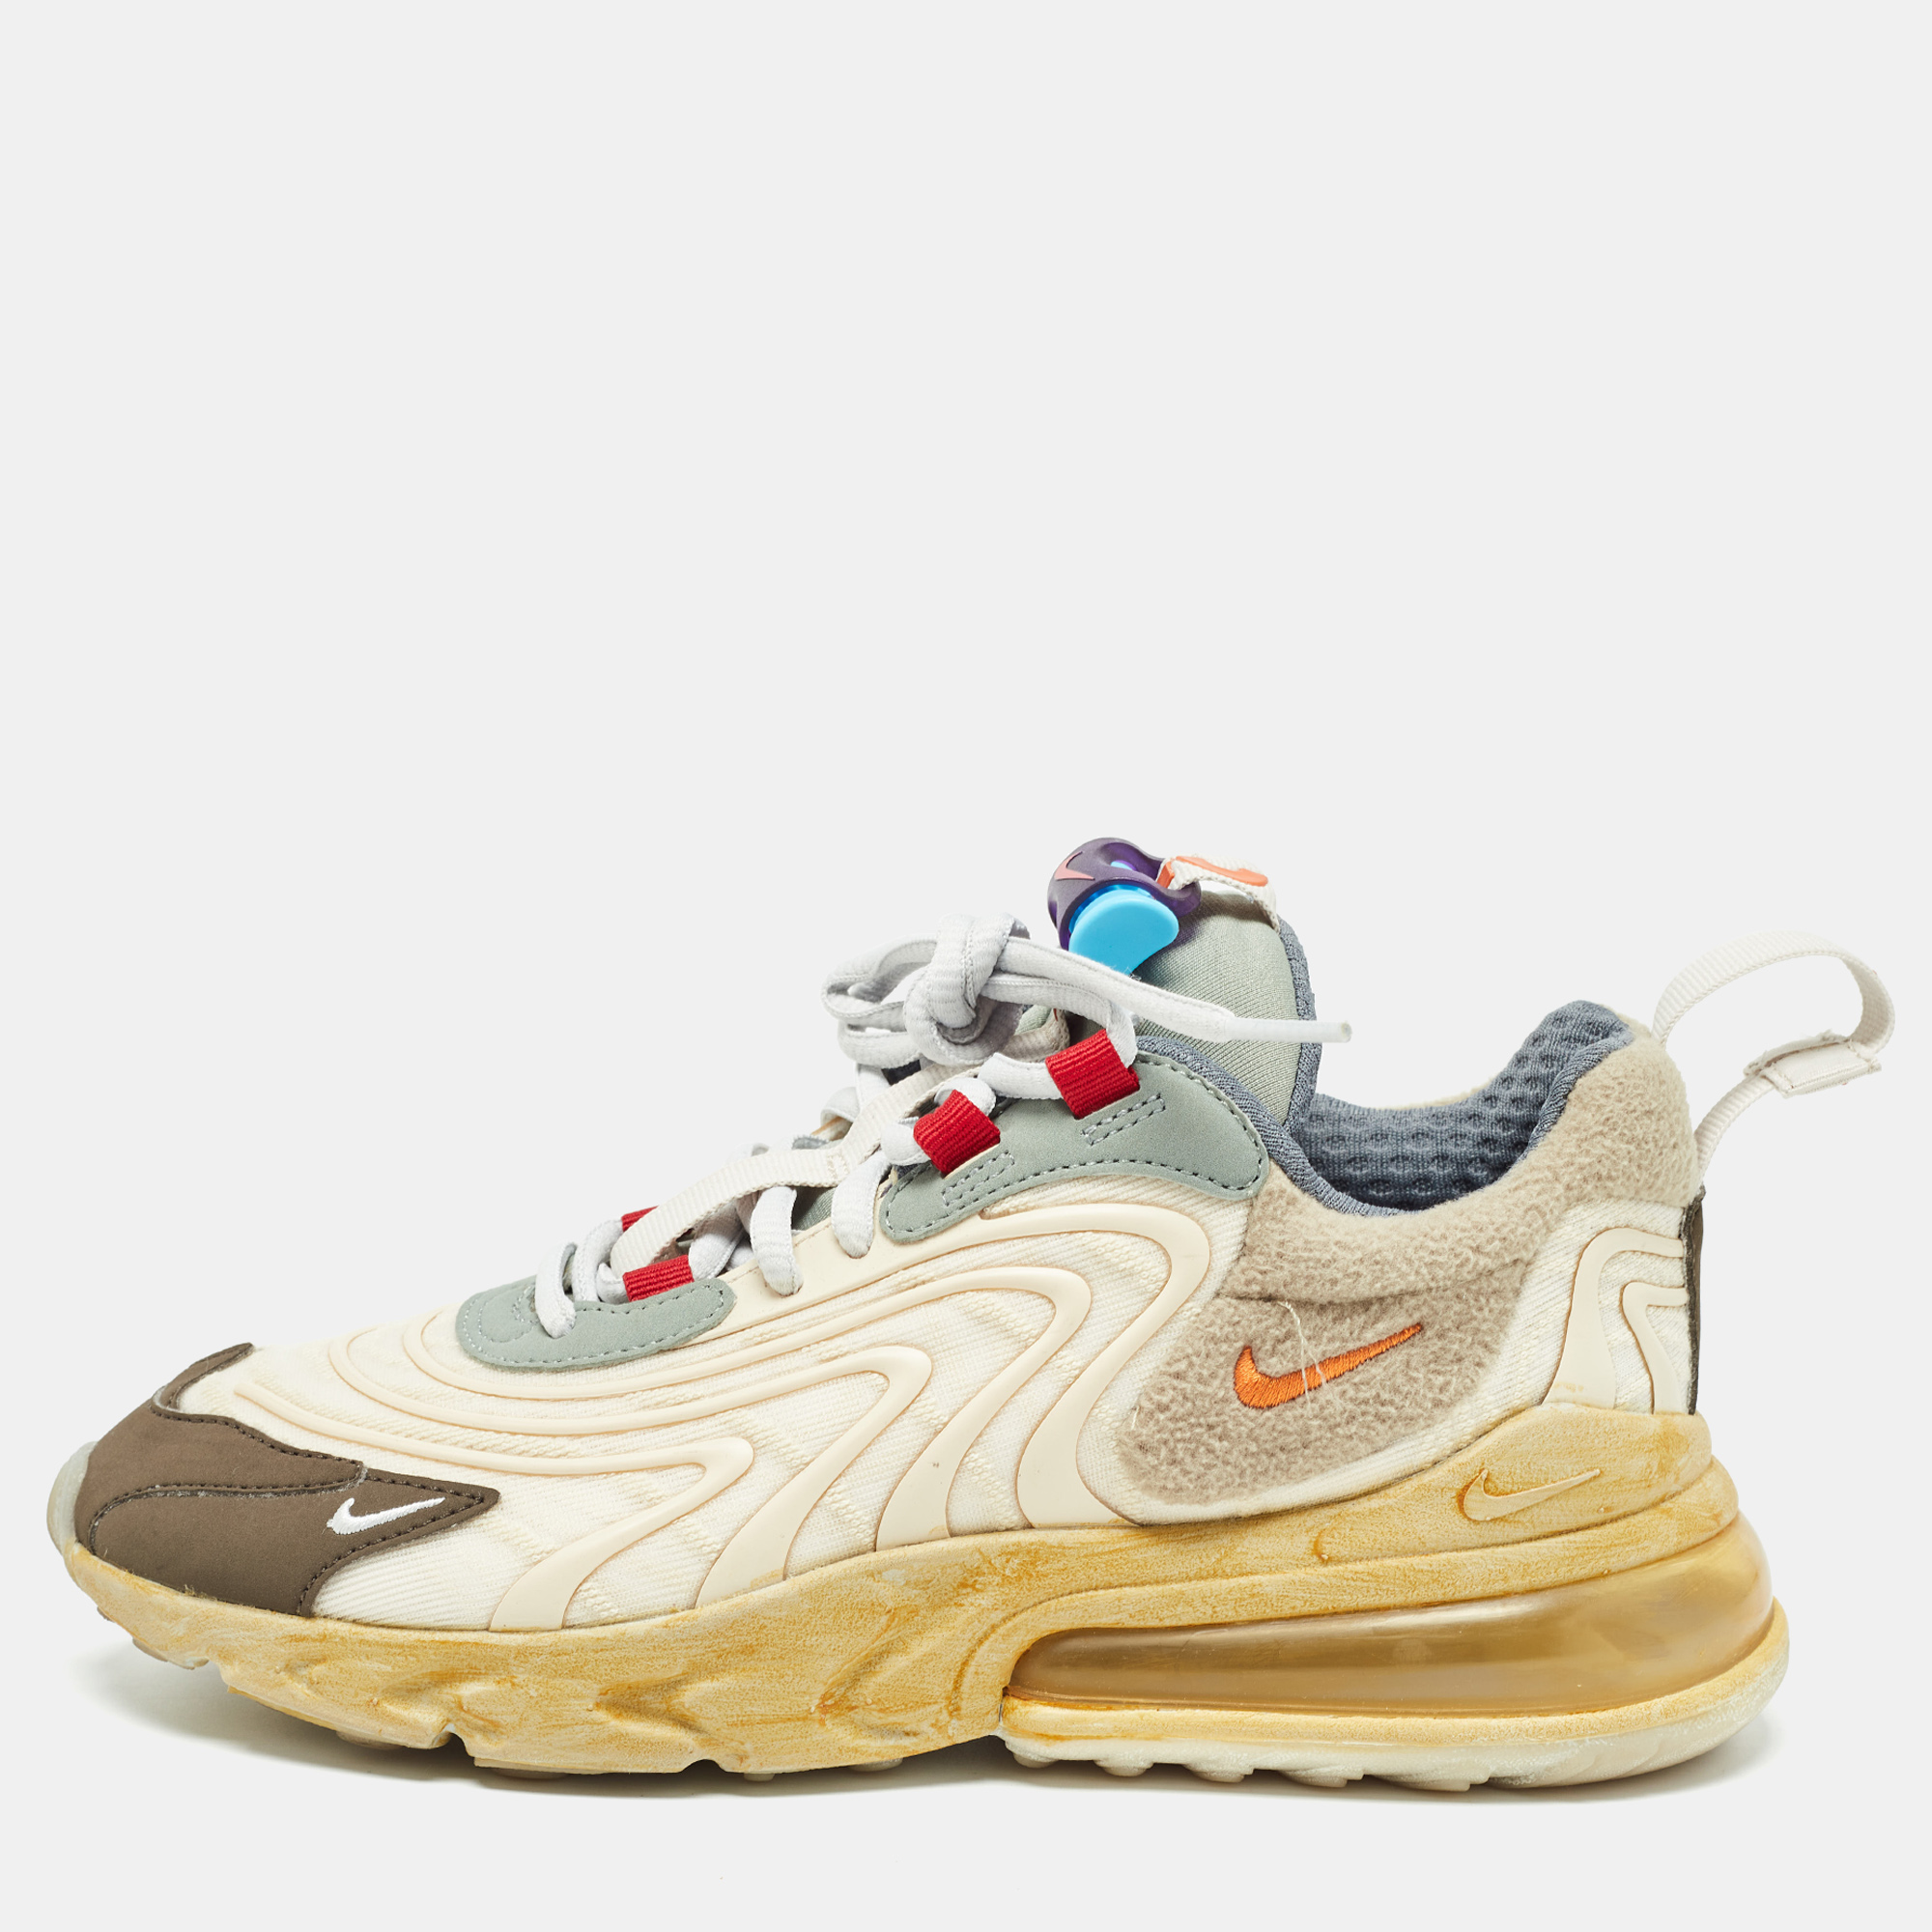 

Nike x Travis Multicolor Fabric Scott Air Max 270 React Cactus Trails Sneakers Size